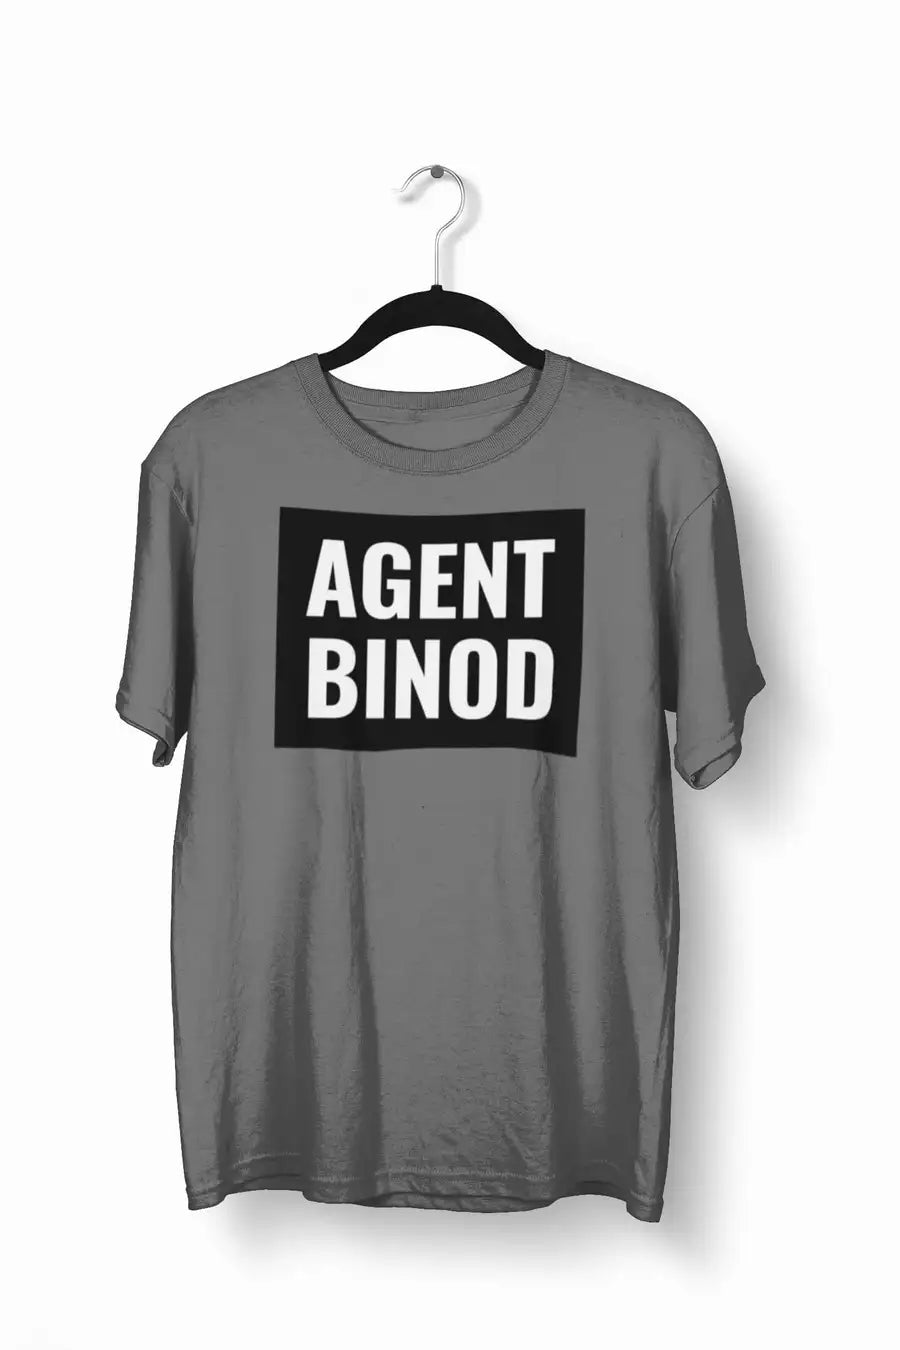 Agent Binod T Shirt for Men and Women | Premium Design | Catch My Drift India - Catch My Drift India Clothing black, bollywood, clothing, funny, made in india, multi colour, shirt, t shirt, t